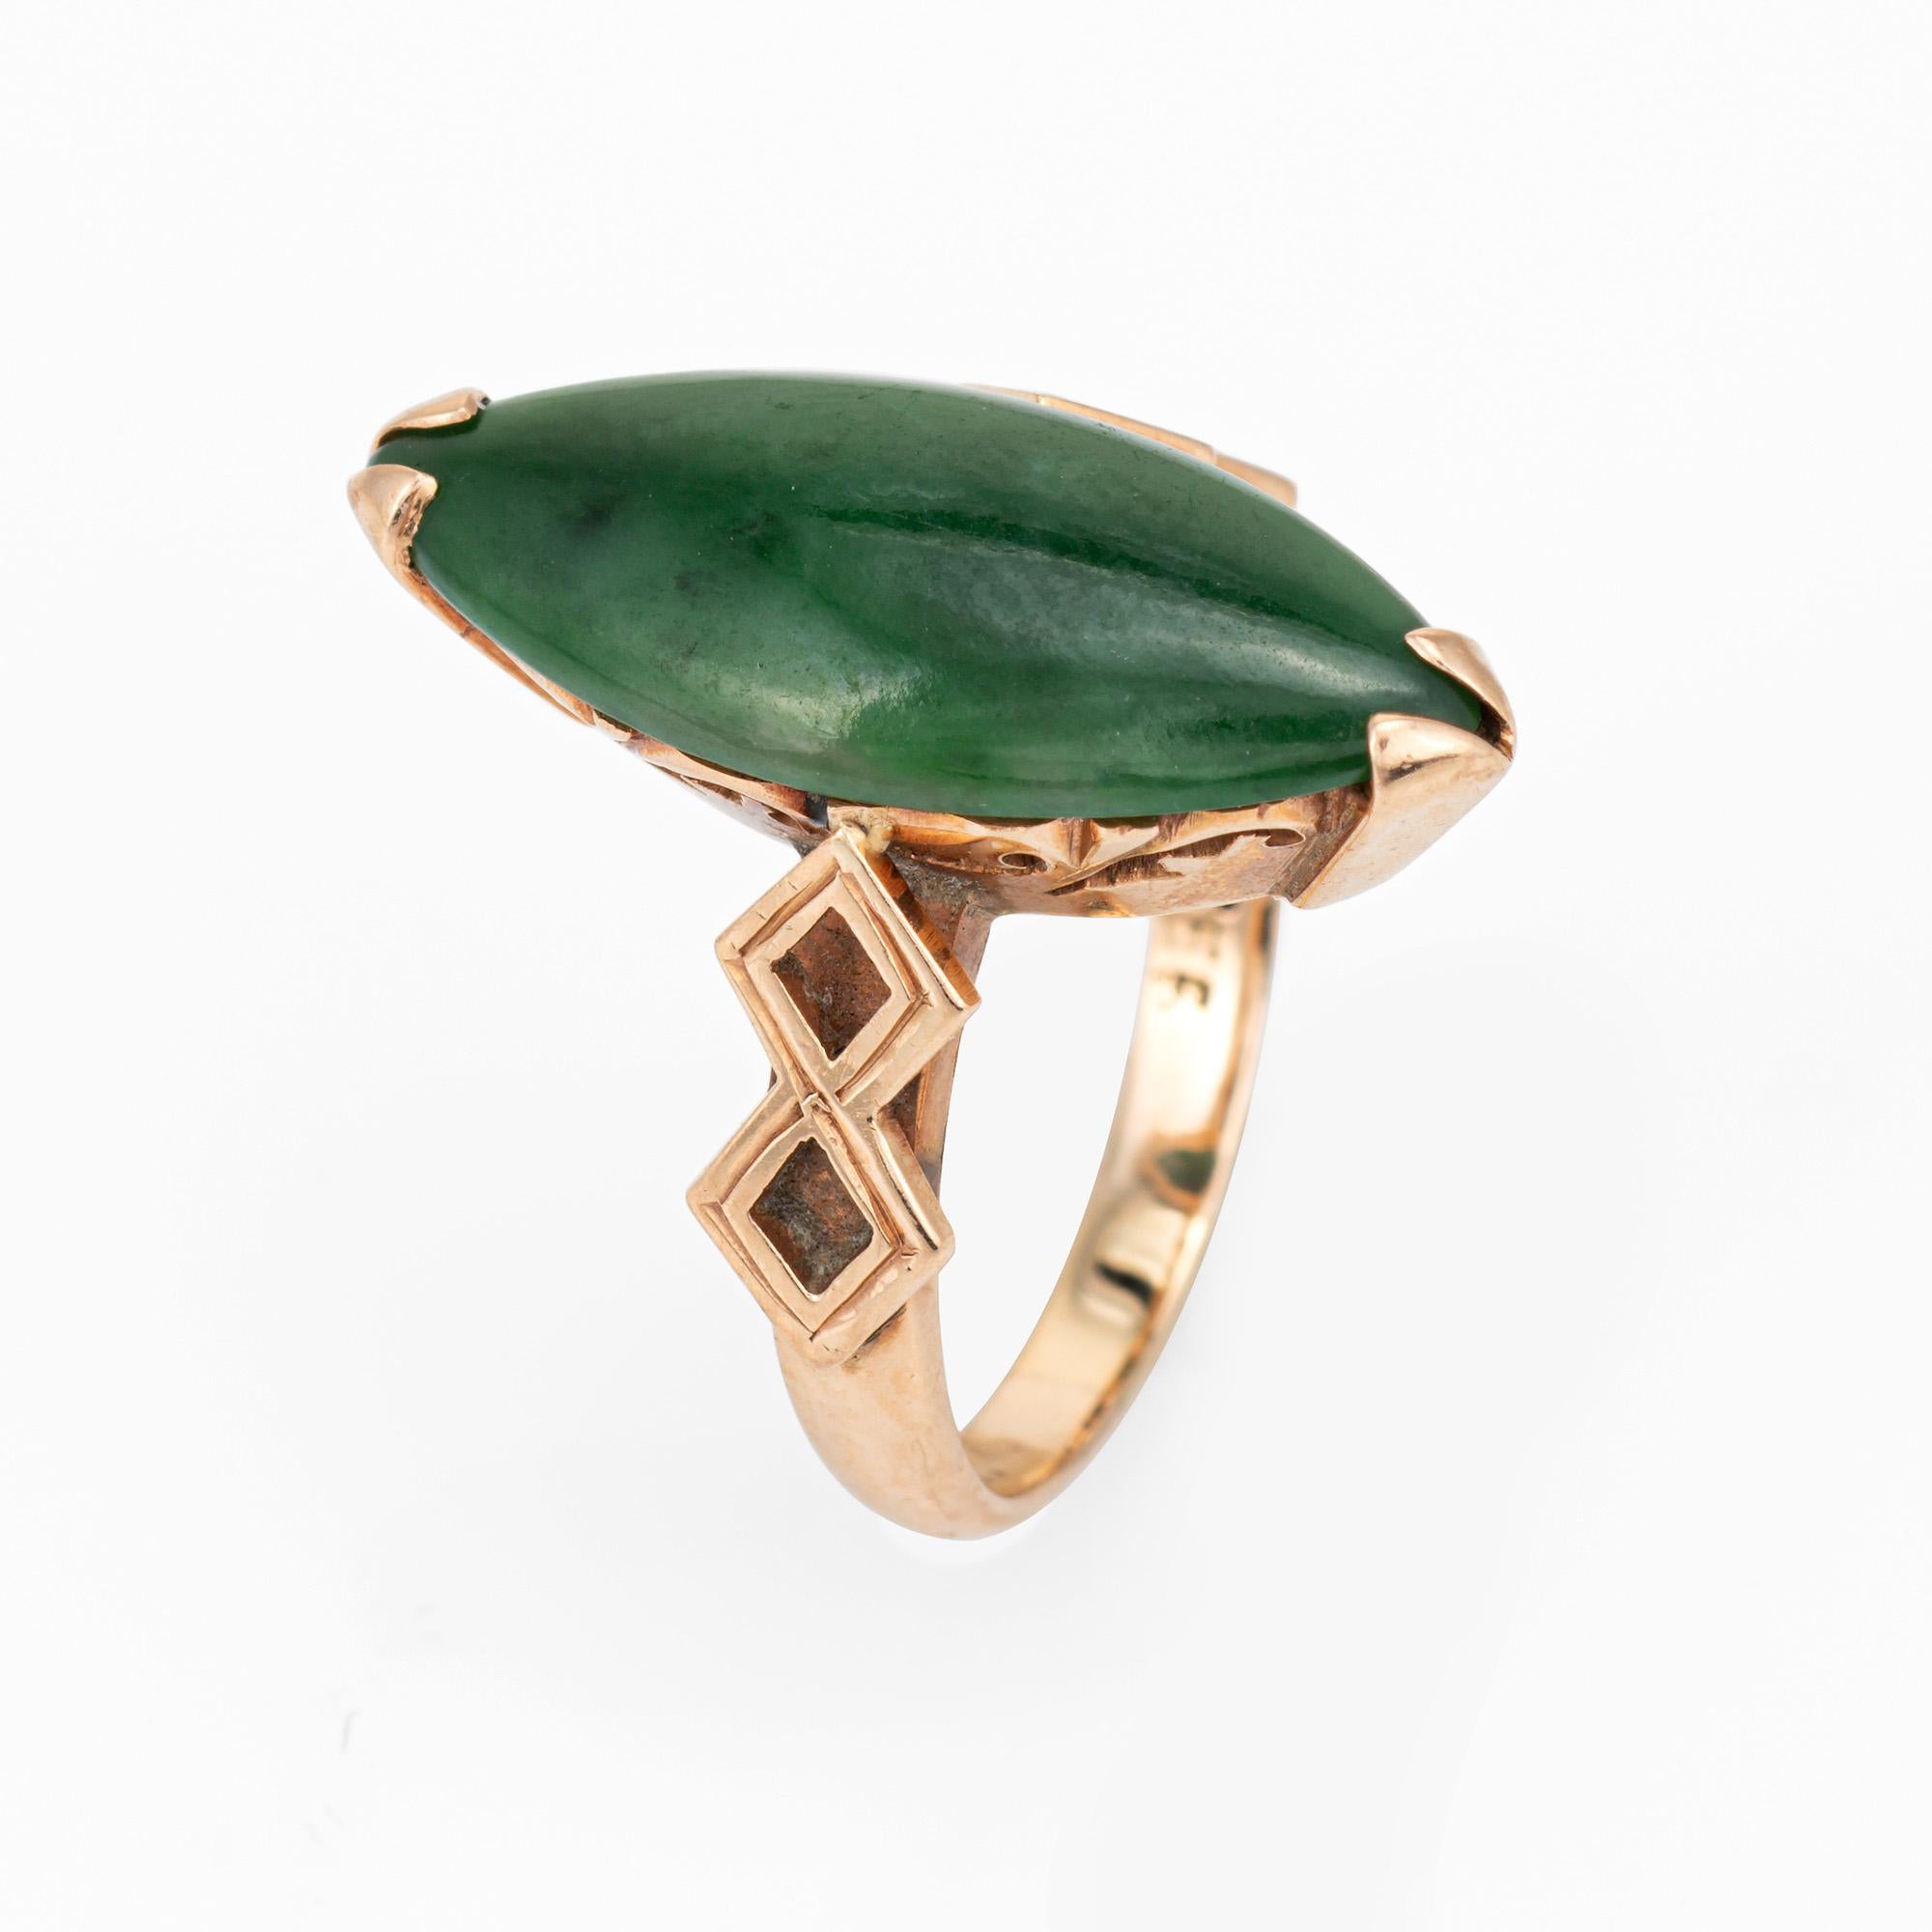 Stylish vintage jade navette style cocktail ring (circa 1960s) crafted in 14 karat yellow gold. 

Cabochon cut jade measures 19mm x 8mm (estimated at 6 carats). The jade is in very good condition and free of cracks or chips.  

The jade is perched